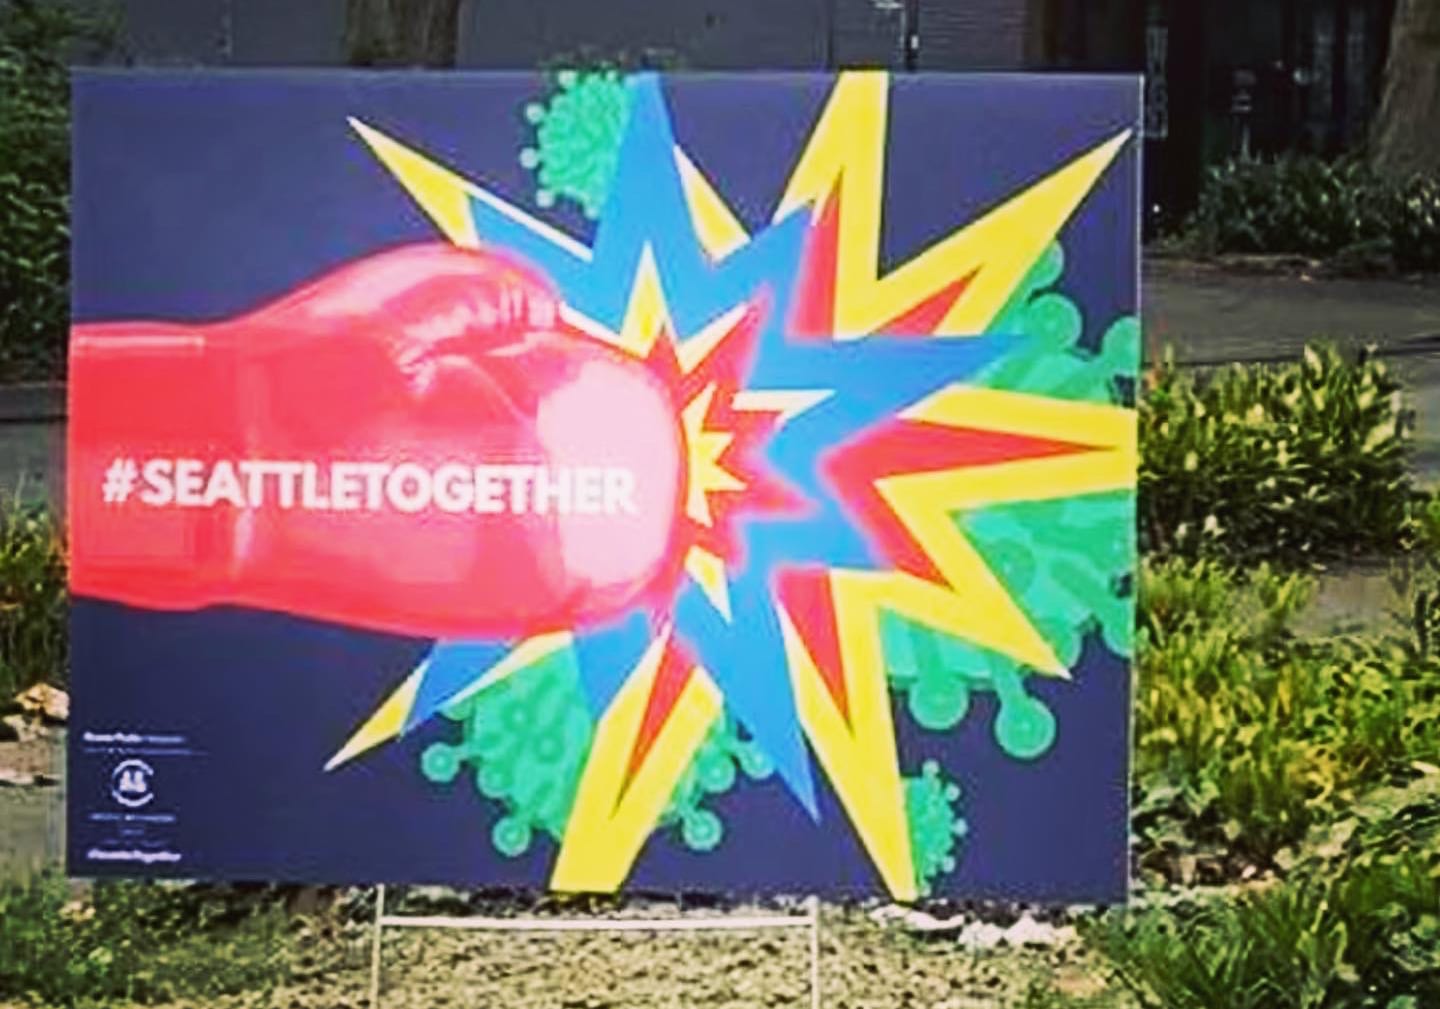 TKOgether, one of the nearly 30 signs created by artists for "Public Art Comes to Your Front Yard" in 2020. Photo Credit: Kristen Ramirez